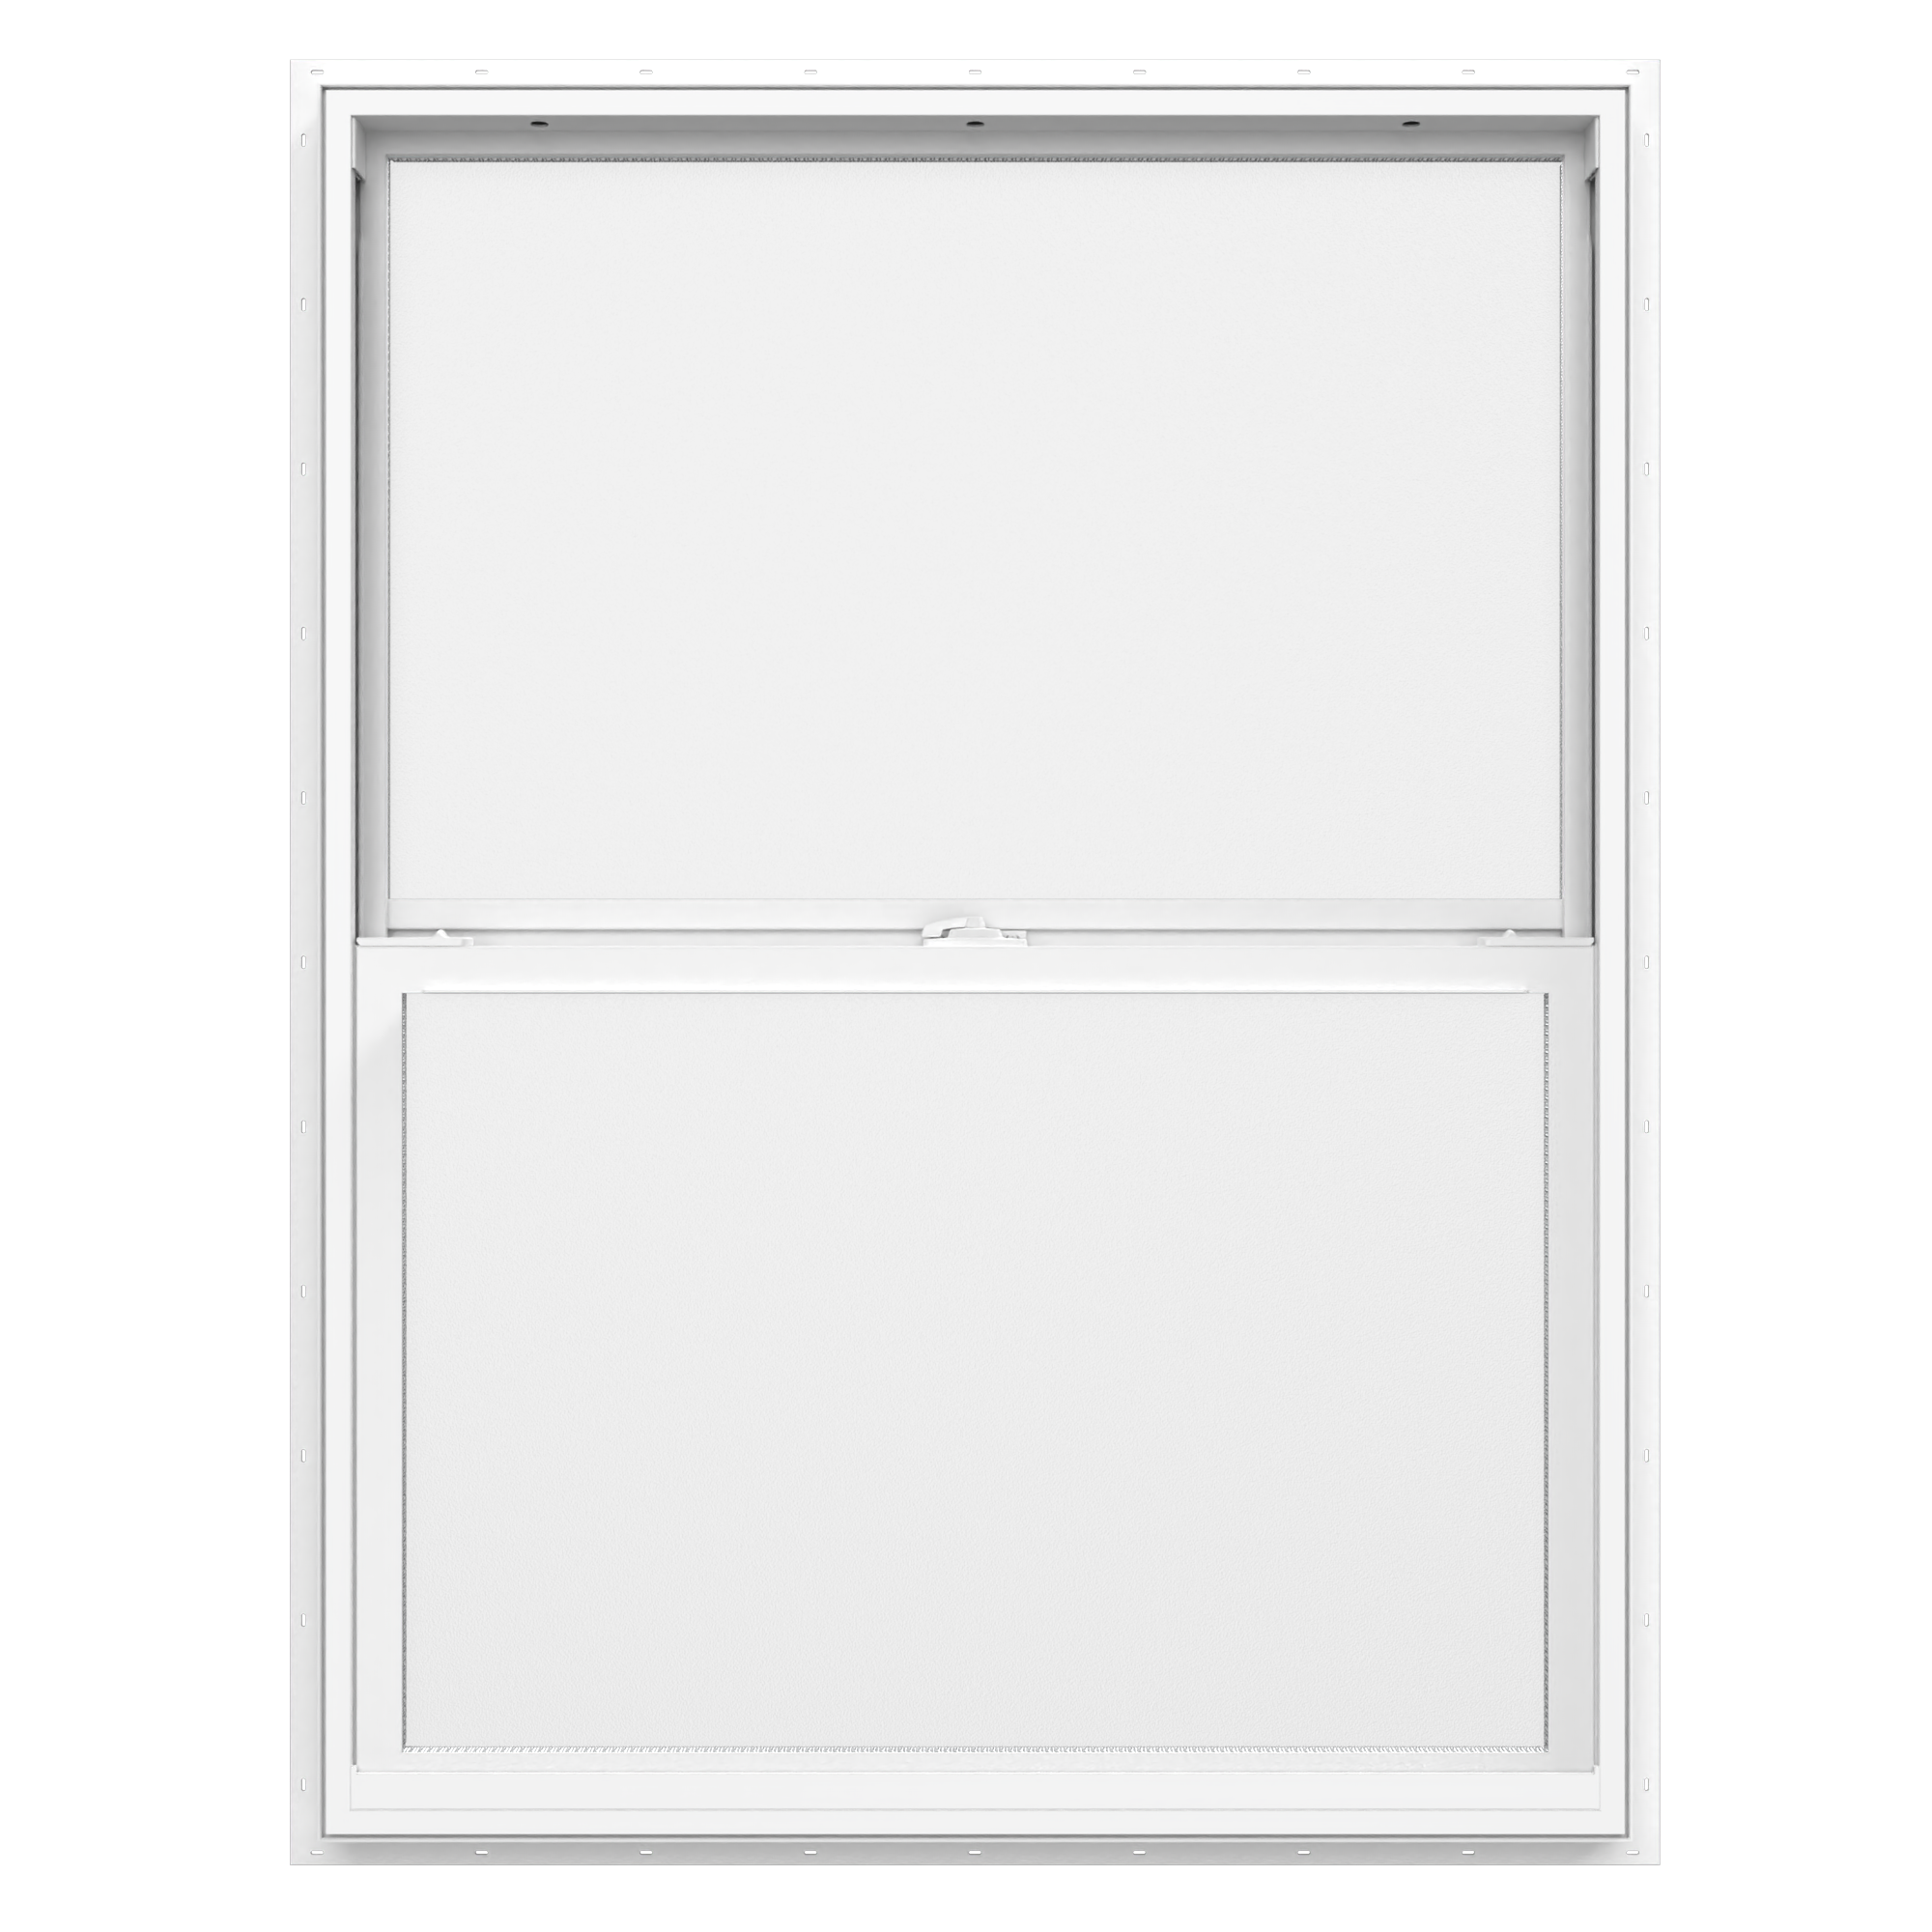 150 Series New Construction 23.5-in x 35.5-in x 2.6875-in Jamb White Vinyl Dual-pane Single Hung Window Half Screen Included | - Pella 1000010079